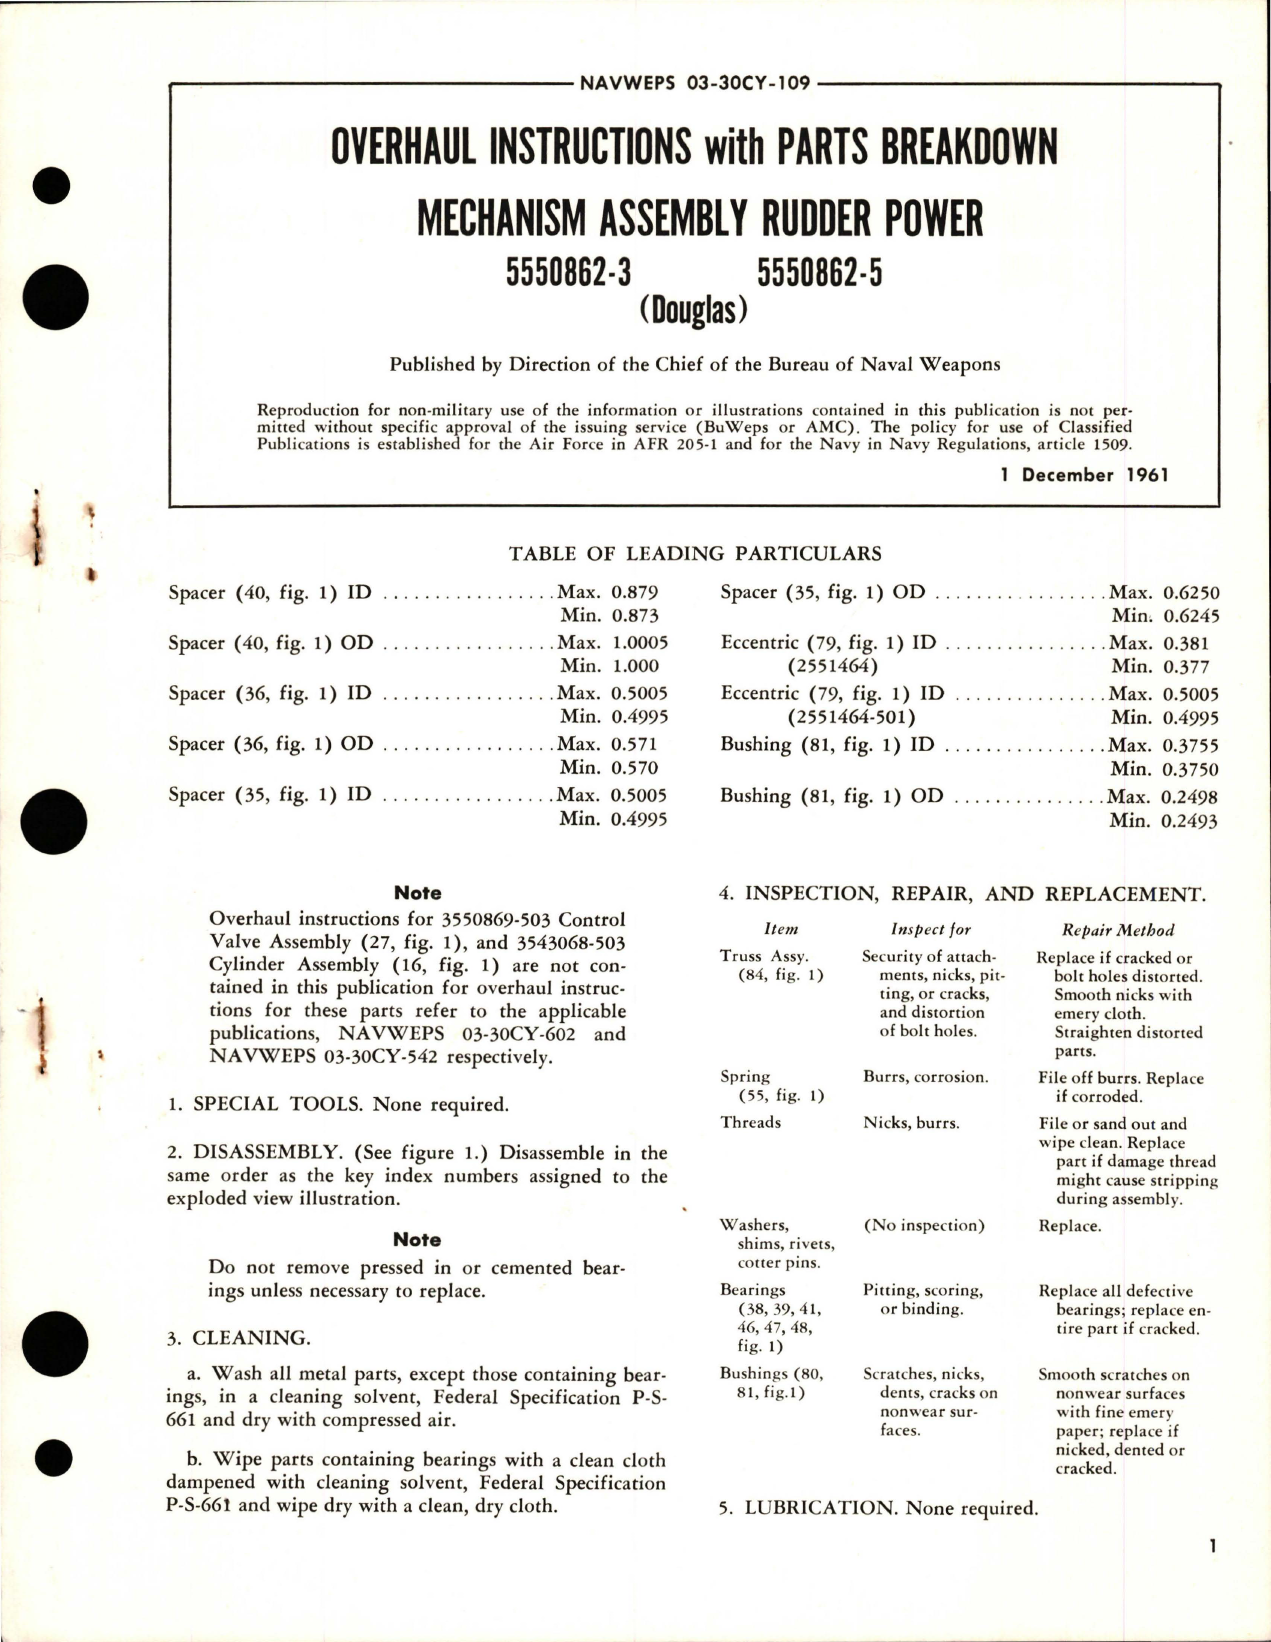 Sample page 1 from AirCorps Library document: Overhaul Instructions with Parts for Mechanism Assembly Rudder Power - 5550862-3 and 5550862-5